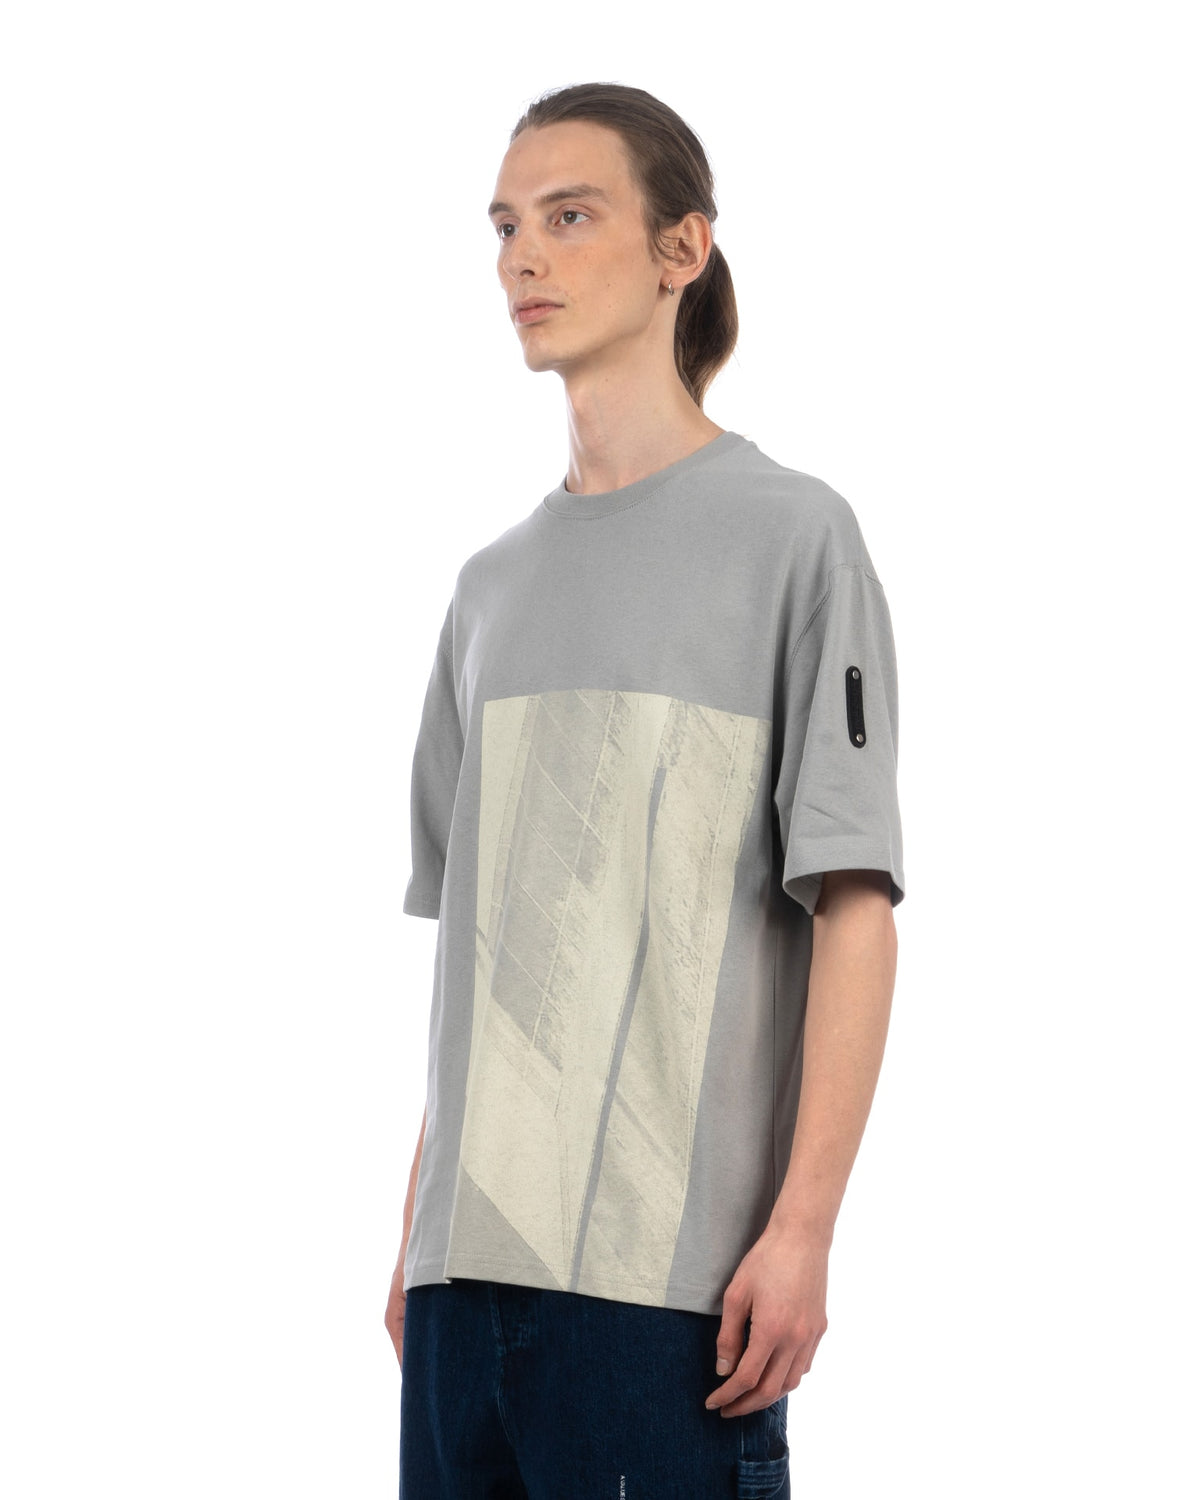 A-COLD-WALL* | Strand T-Shirt Cement - Concrete